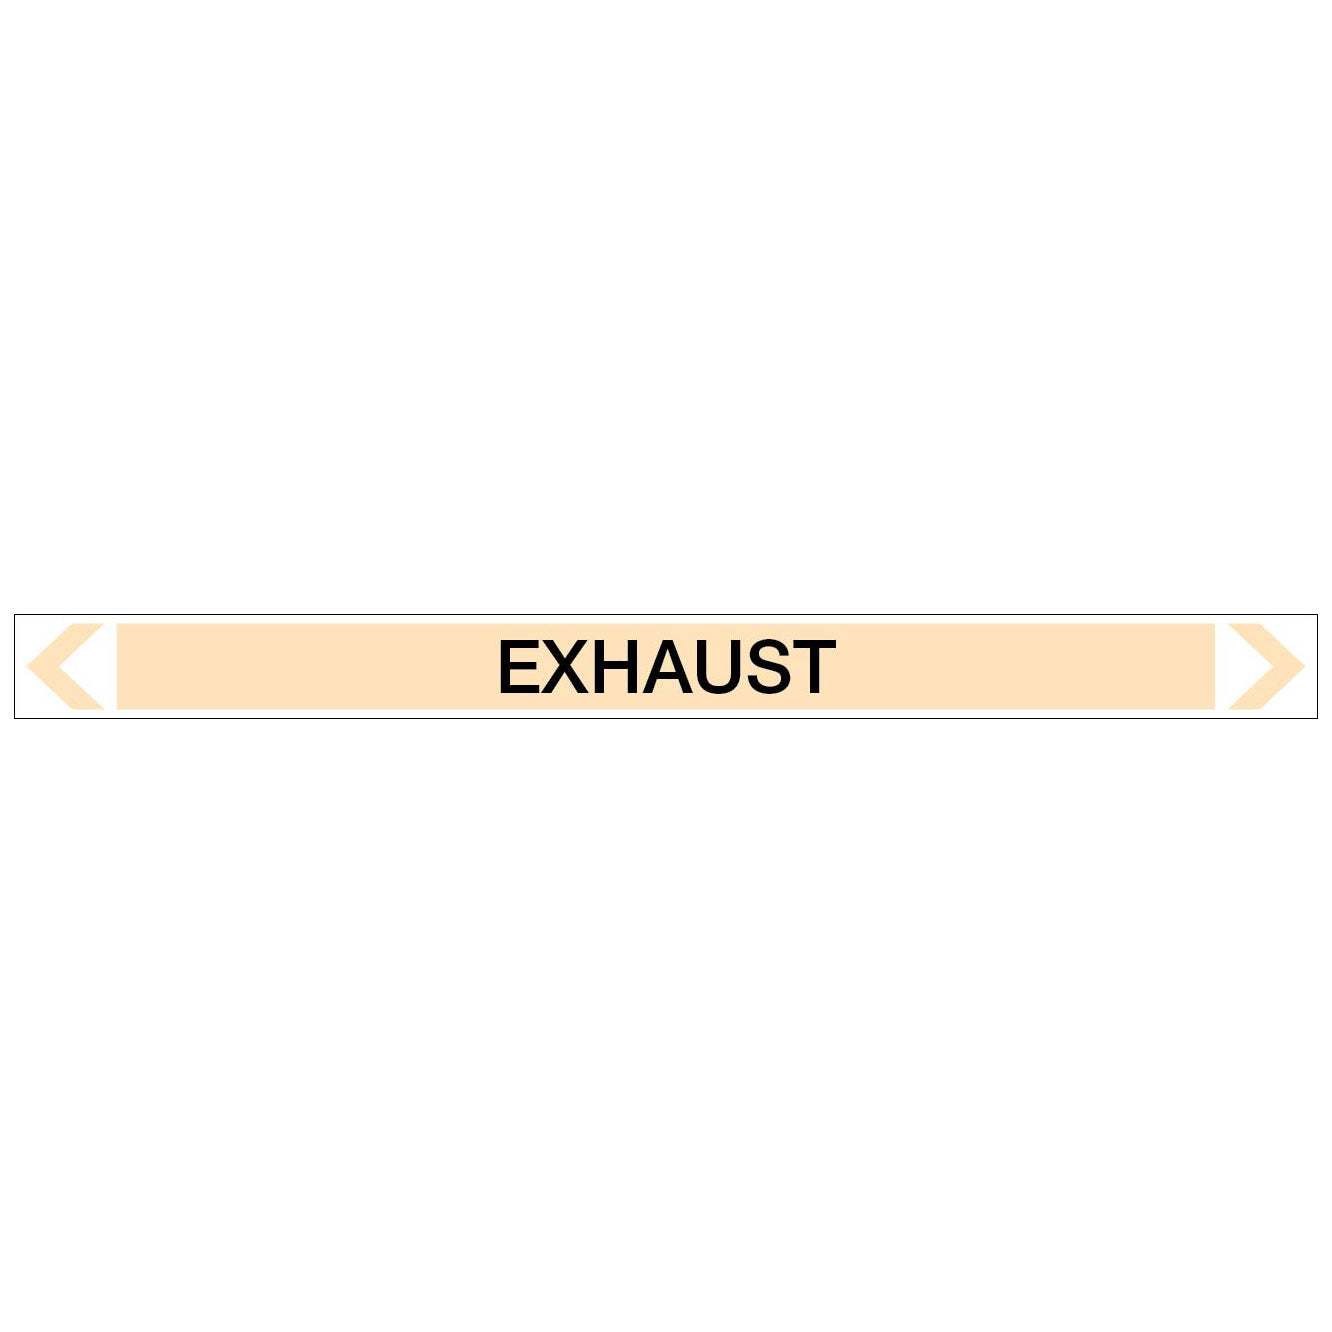 Gases - Exhaust - Pipe Marker Sticker